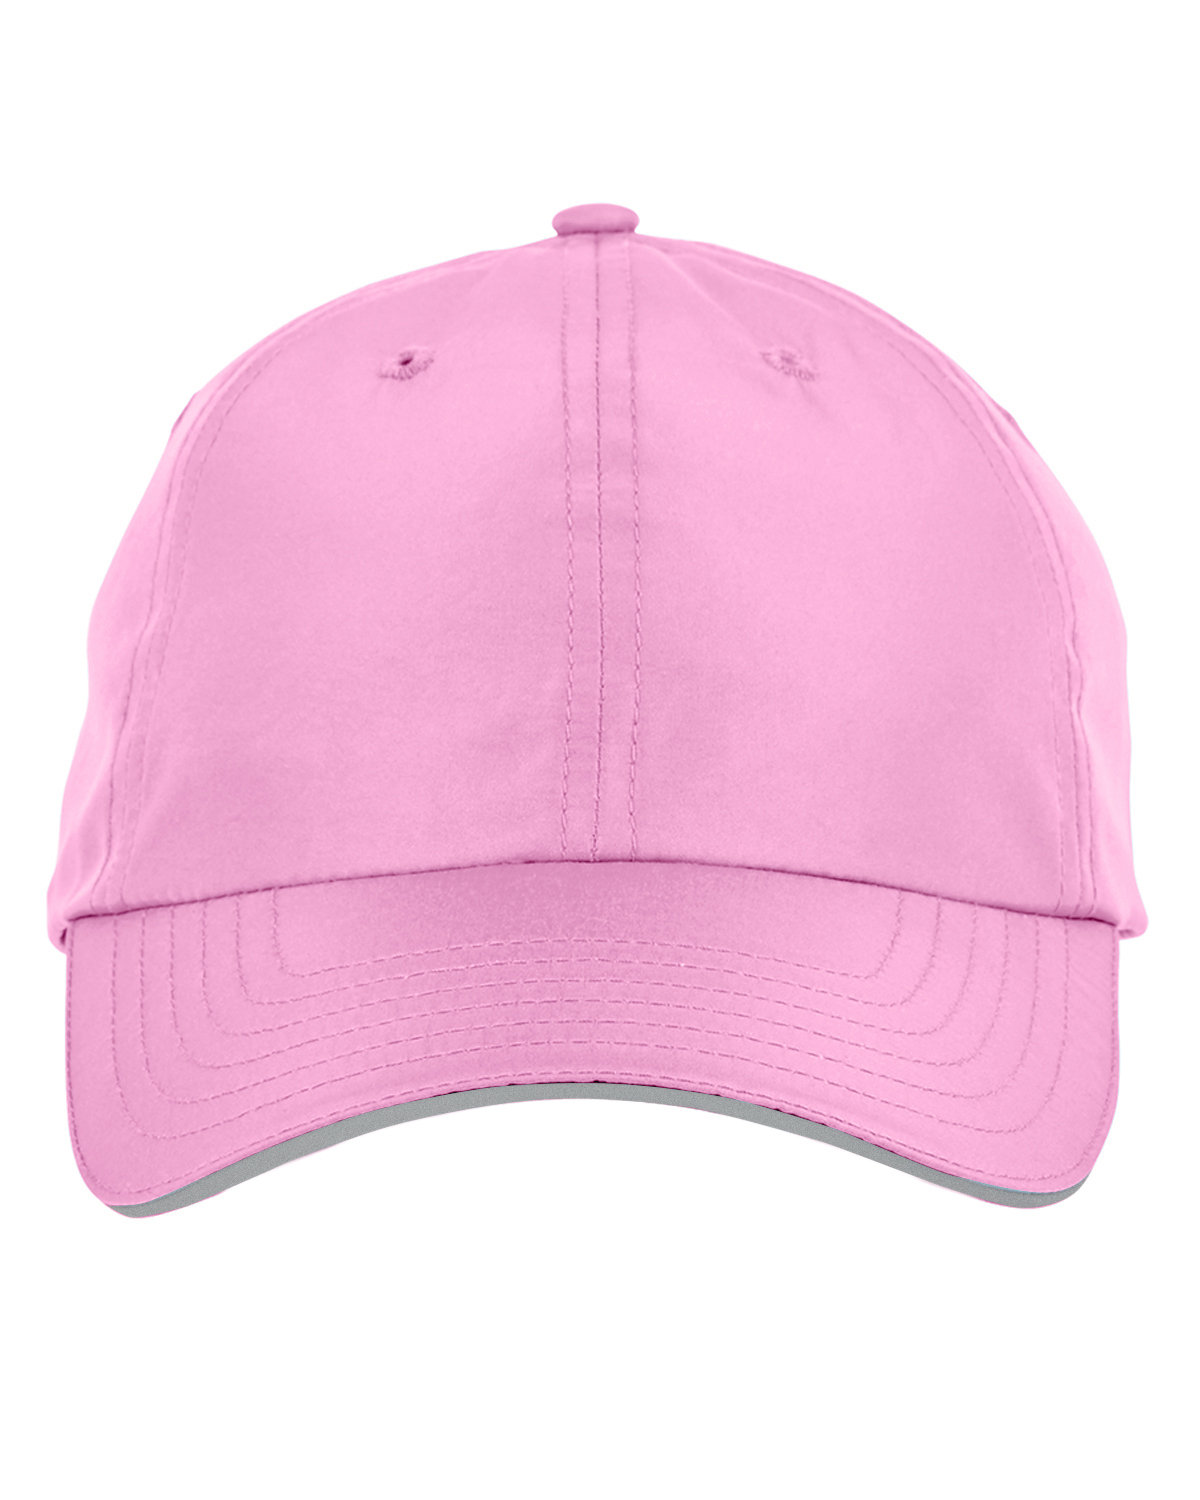 Core 365 Adult Pitch Performance Cap CHARITY PINK 